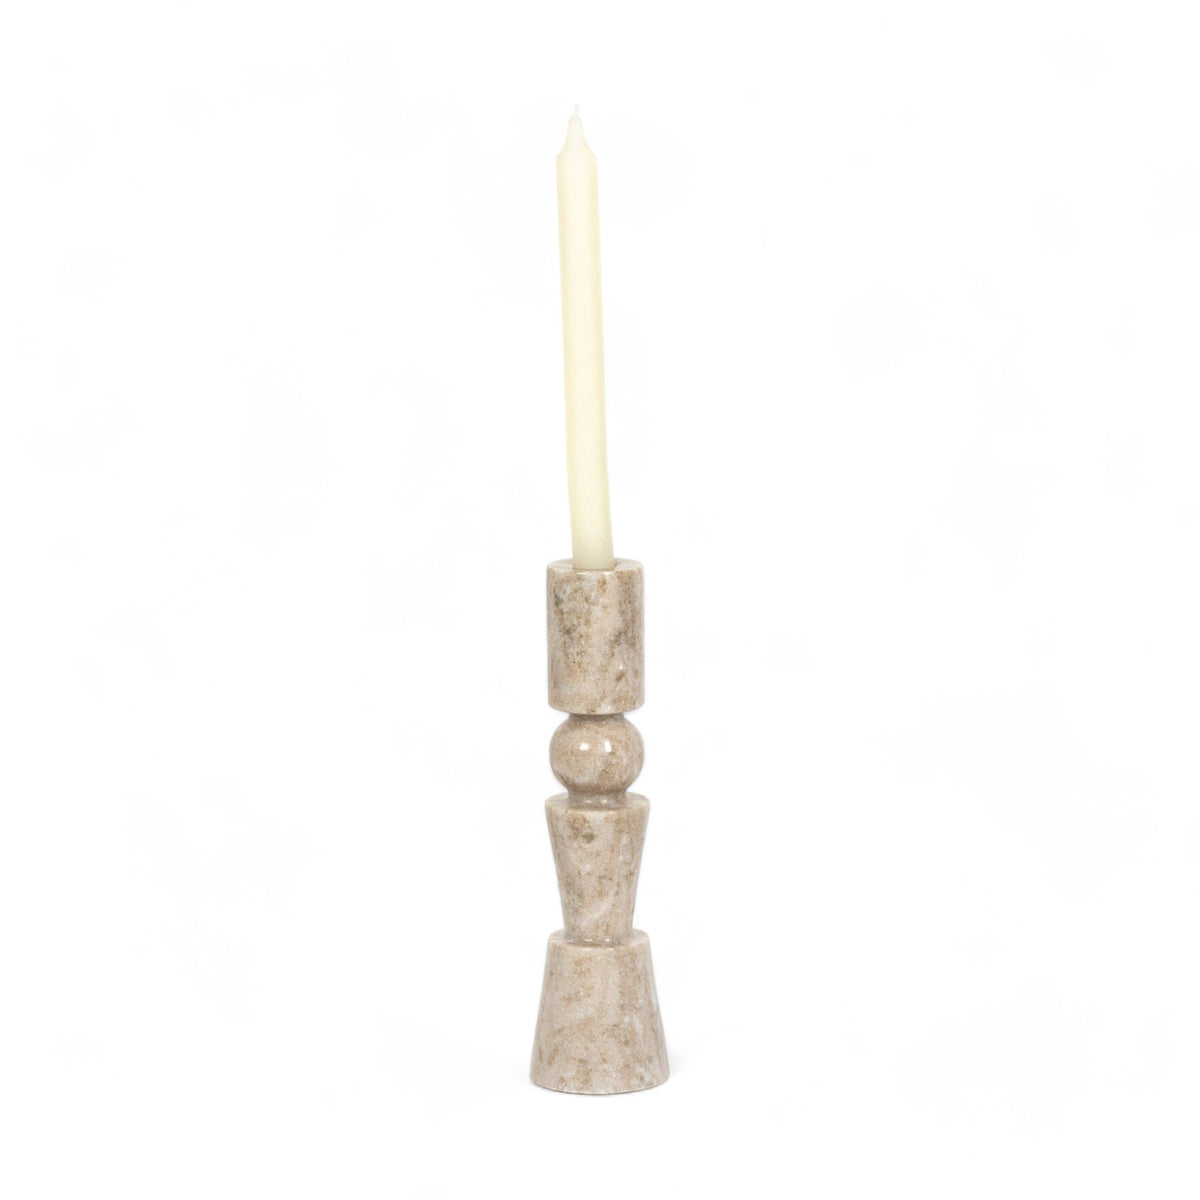 Marble Taper Candlesticks - Pair